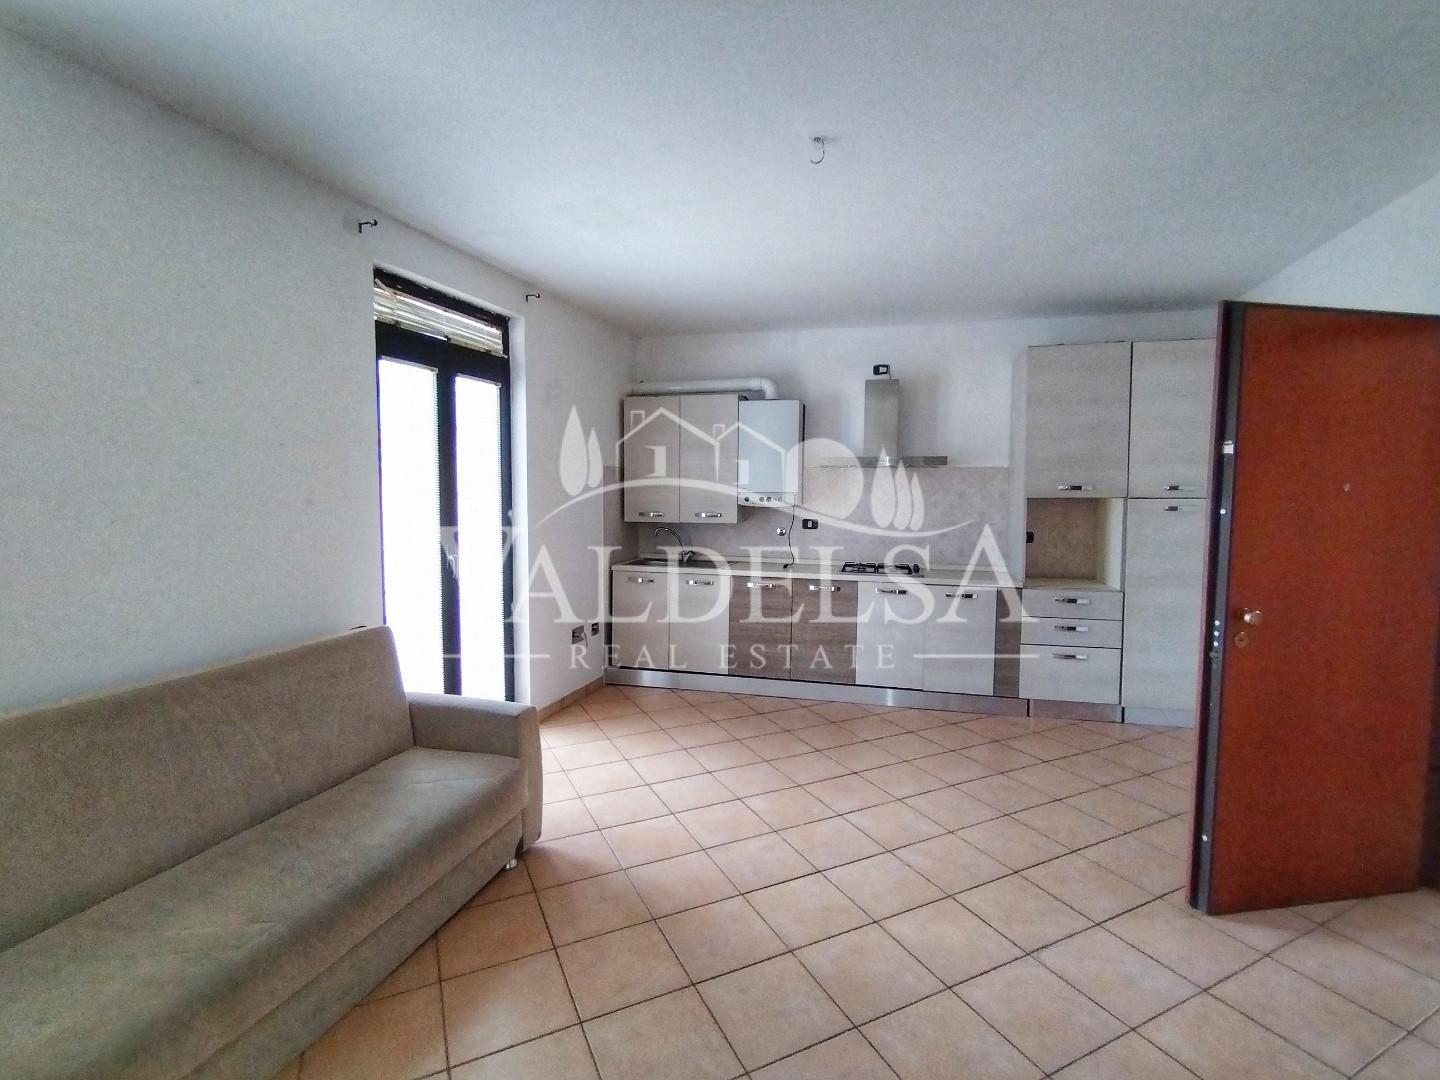 Apartment for sale, ref. 751